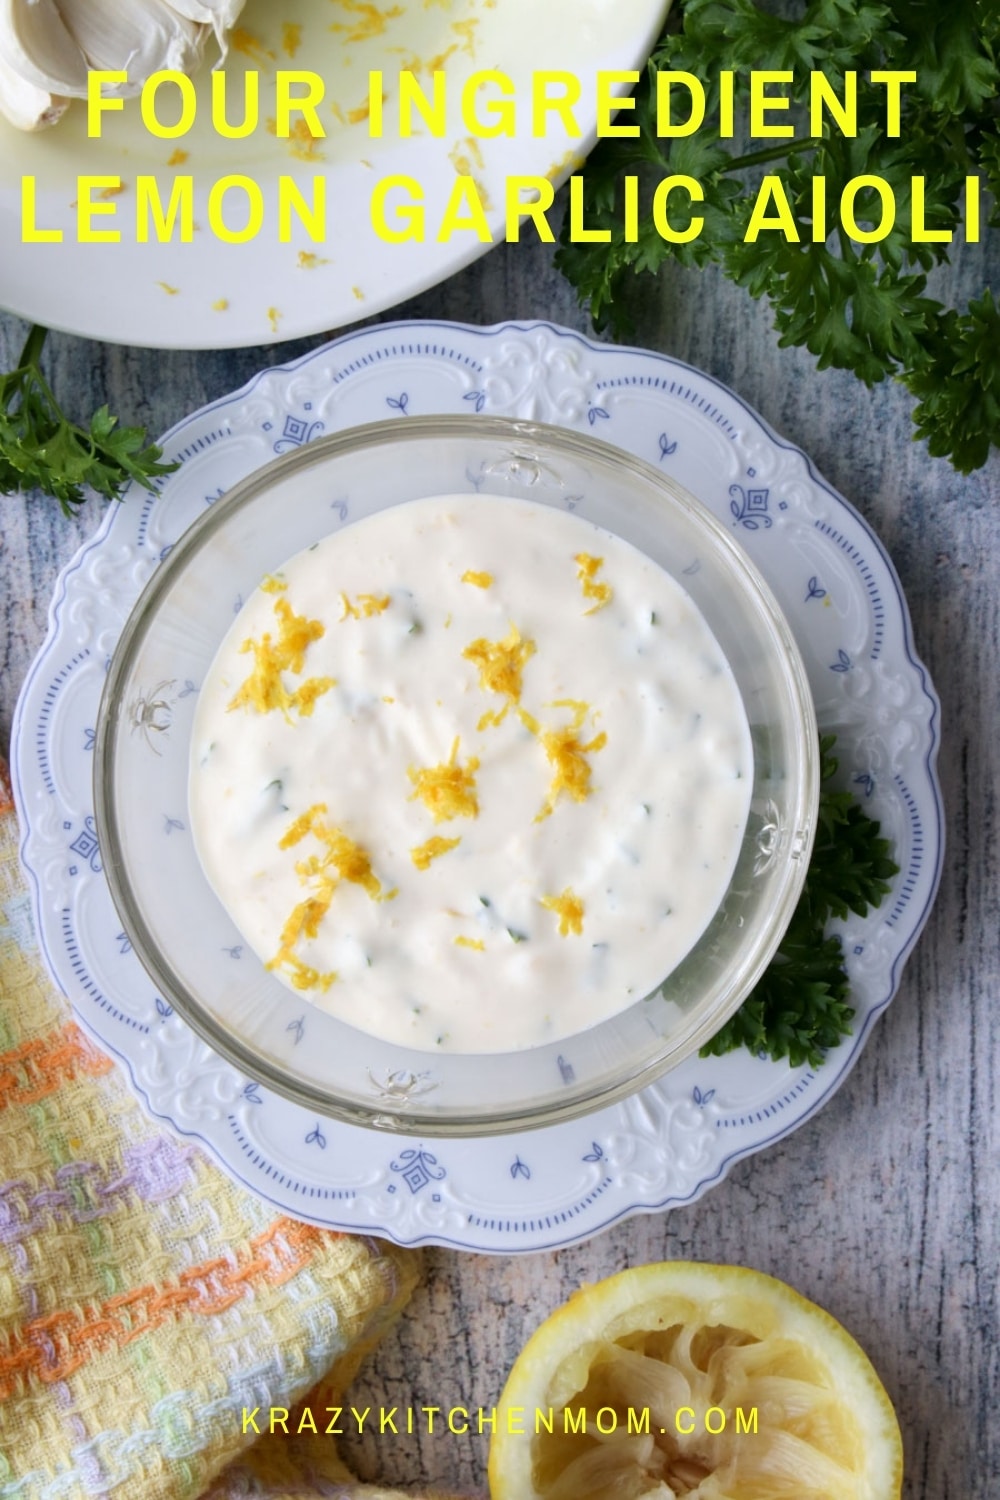 Make a creamy, zesty, bright, aioli using only four ingredients. Use it where ever you would use mayonnaise - as a spread or a dip. Creamy, zesty, bright deliciousness. via @krazykitchenmom